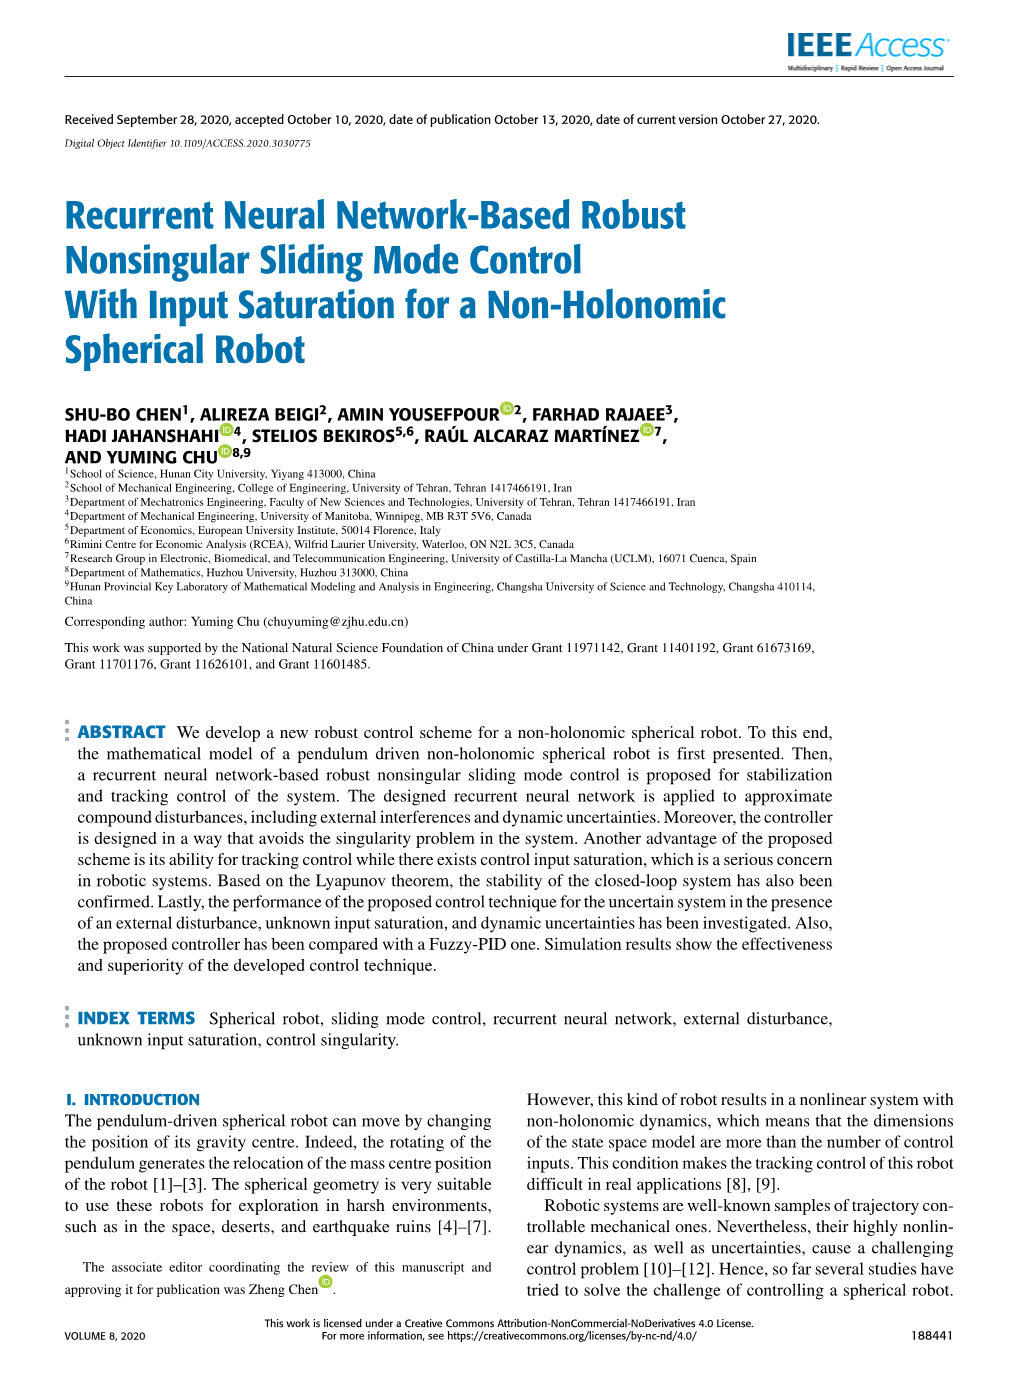 Recurrent Neural Network-Based Robust Nonsingular Sliding Mode Control with Input Saturation for a Non-Holonomic Spherical Robot